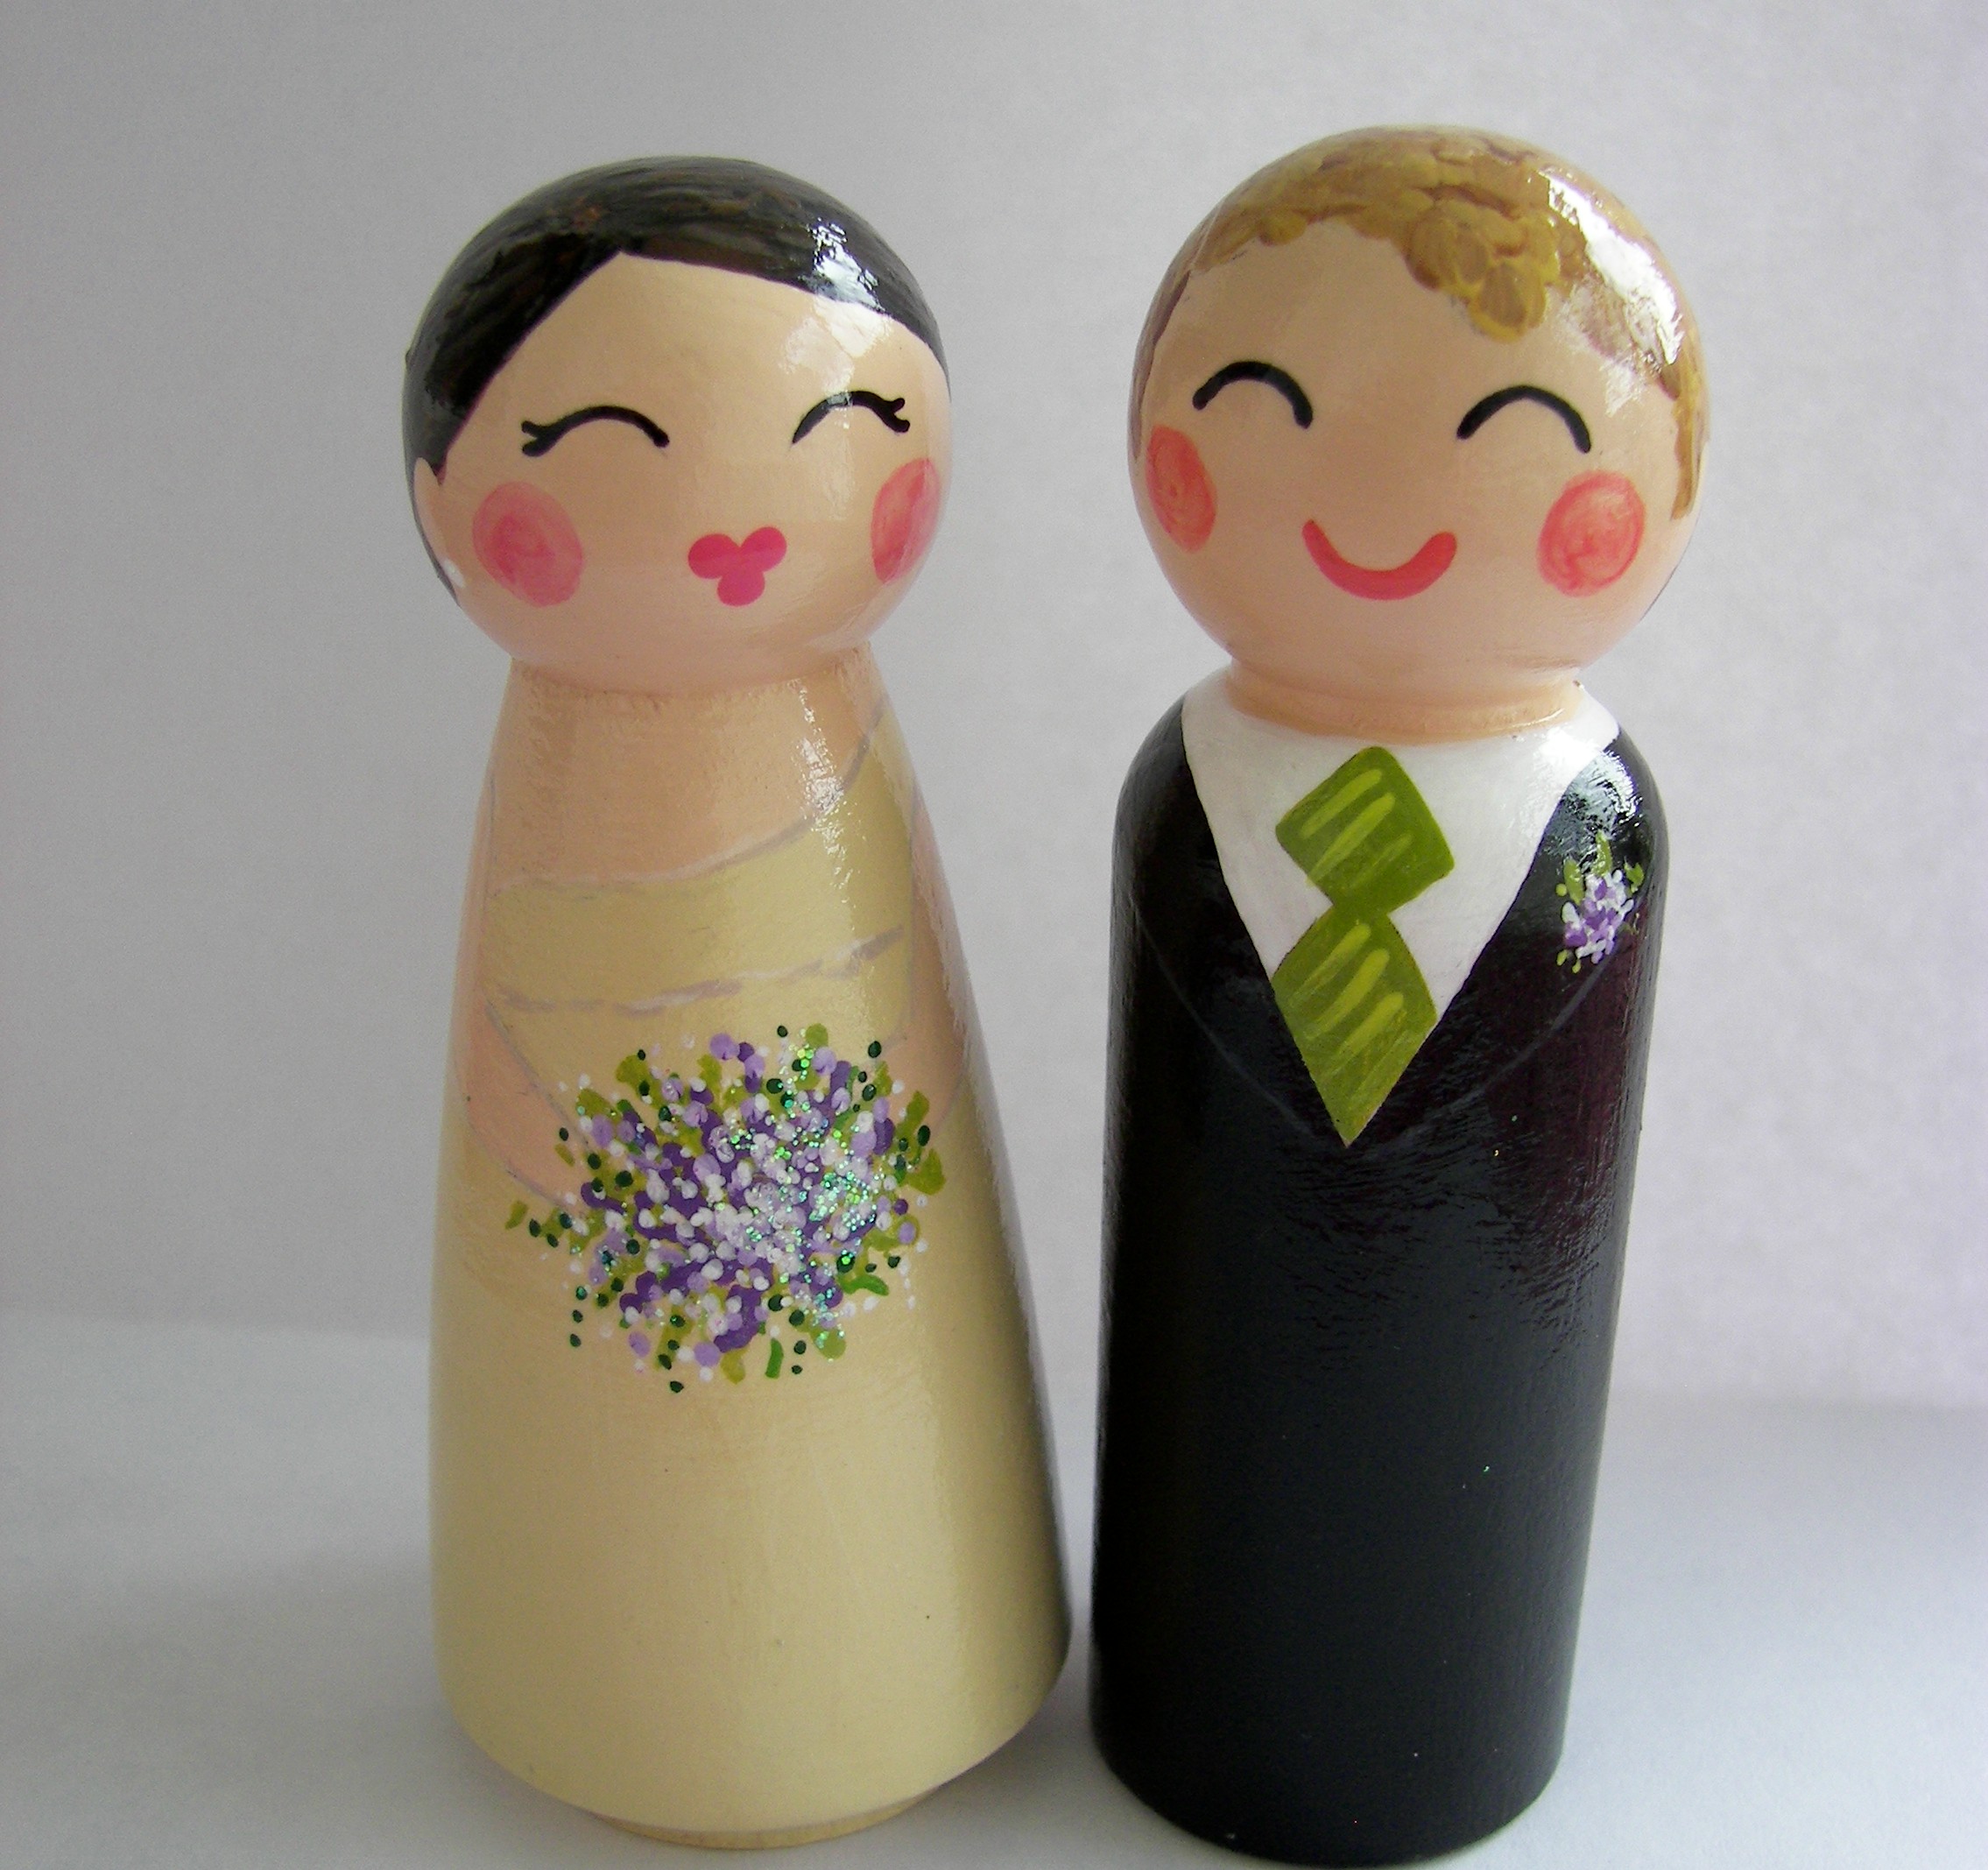 Cake Toppers Peg Doll Portraits